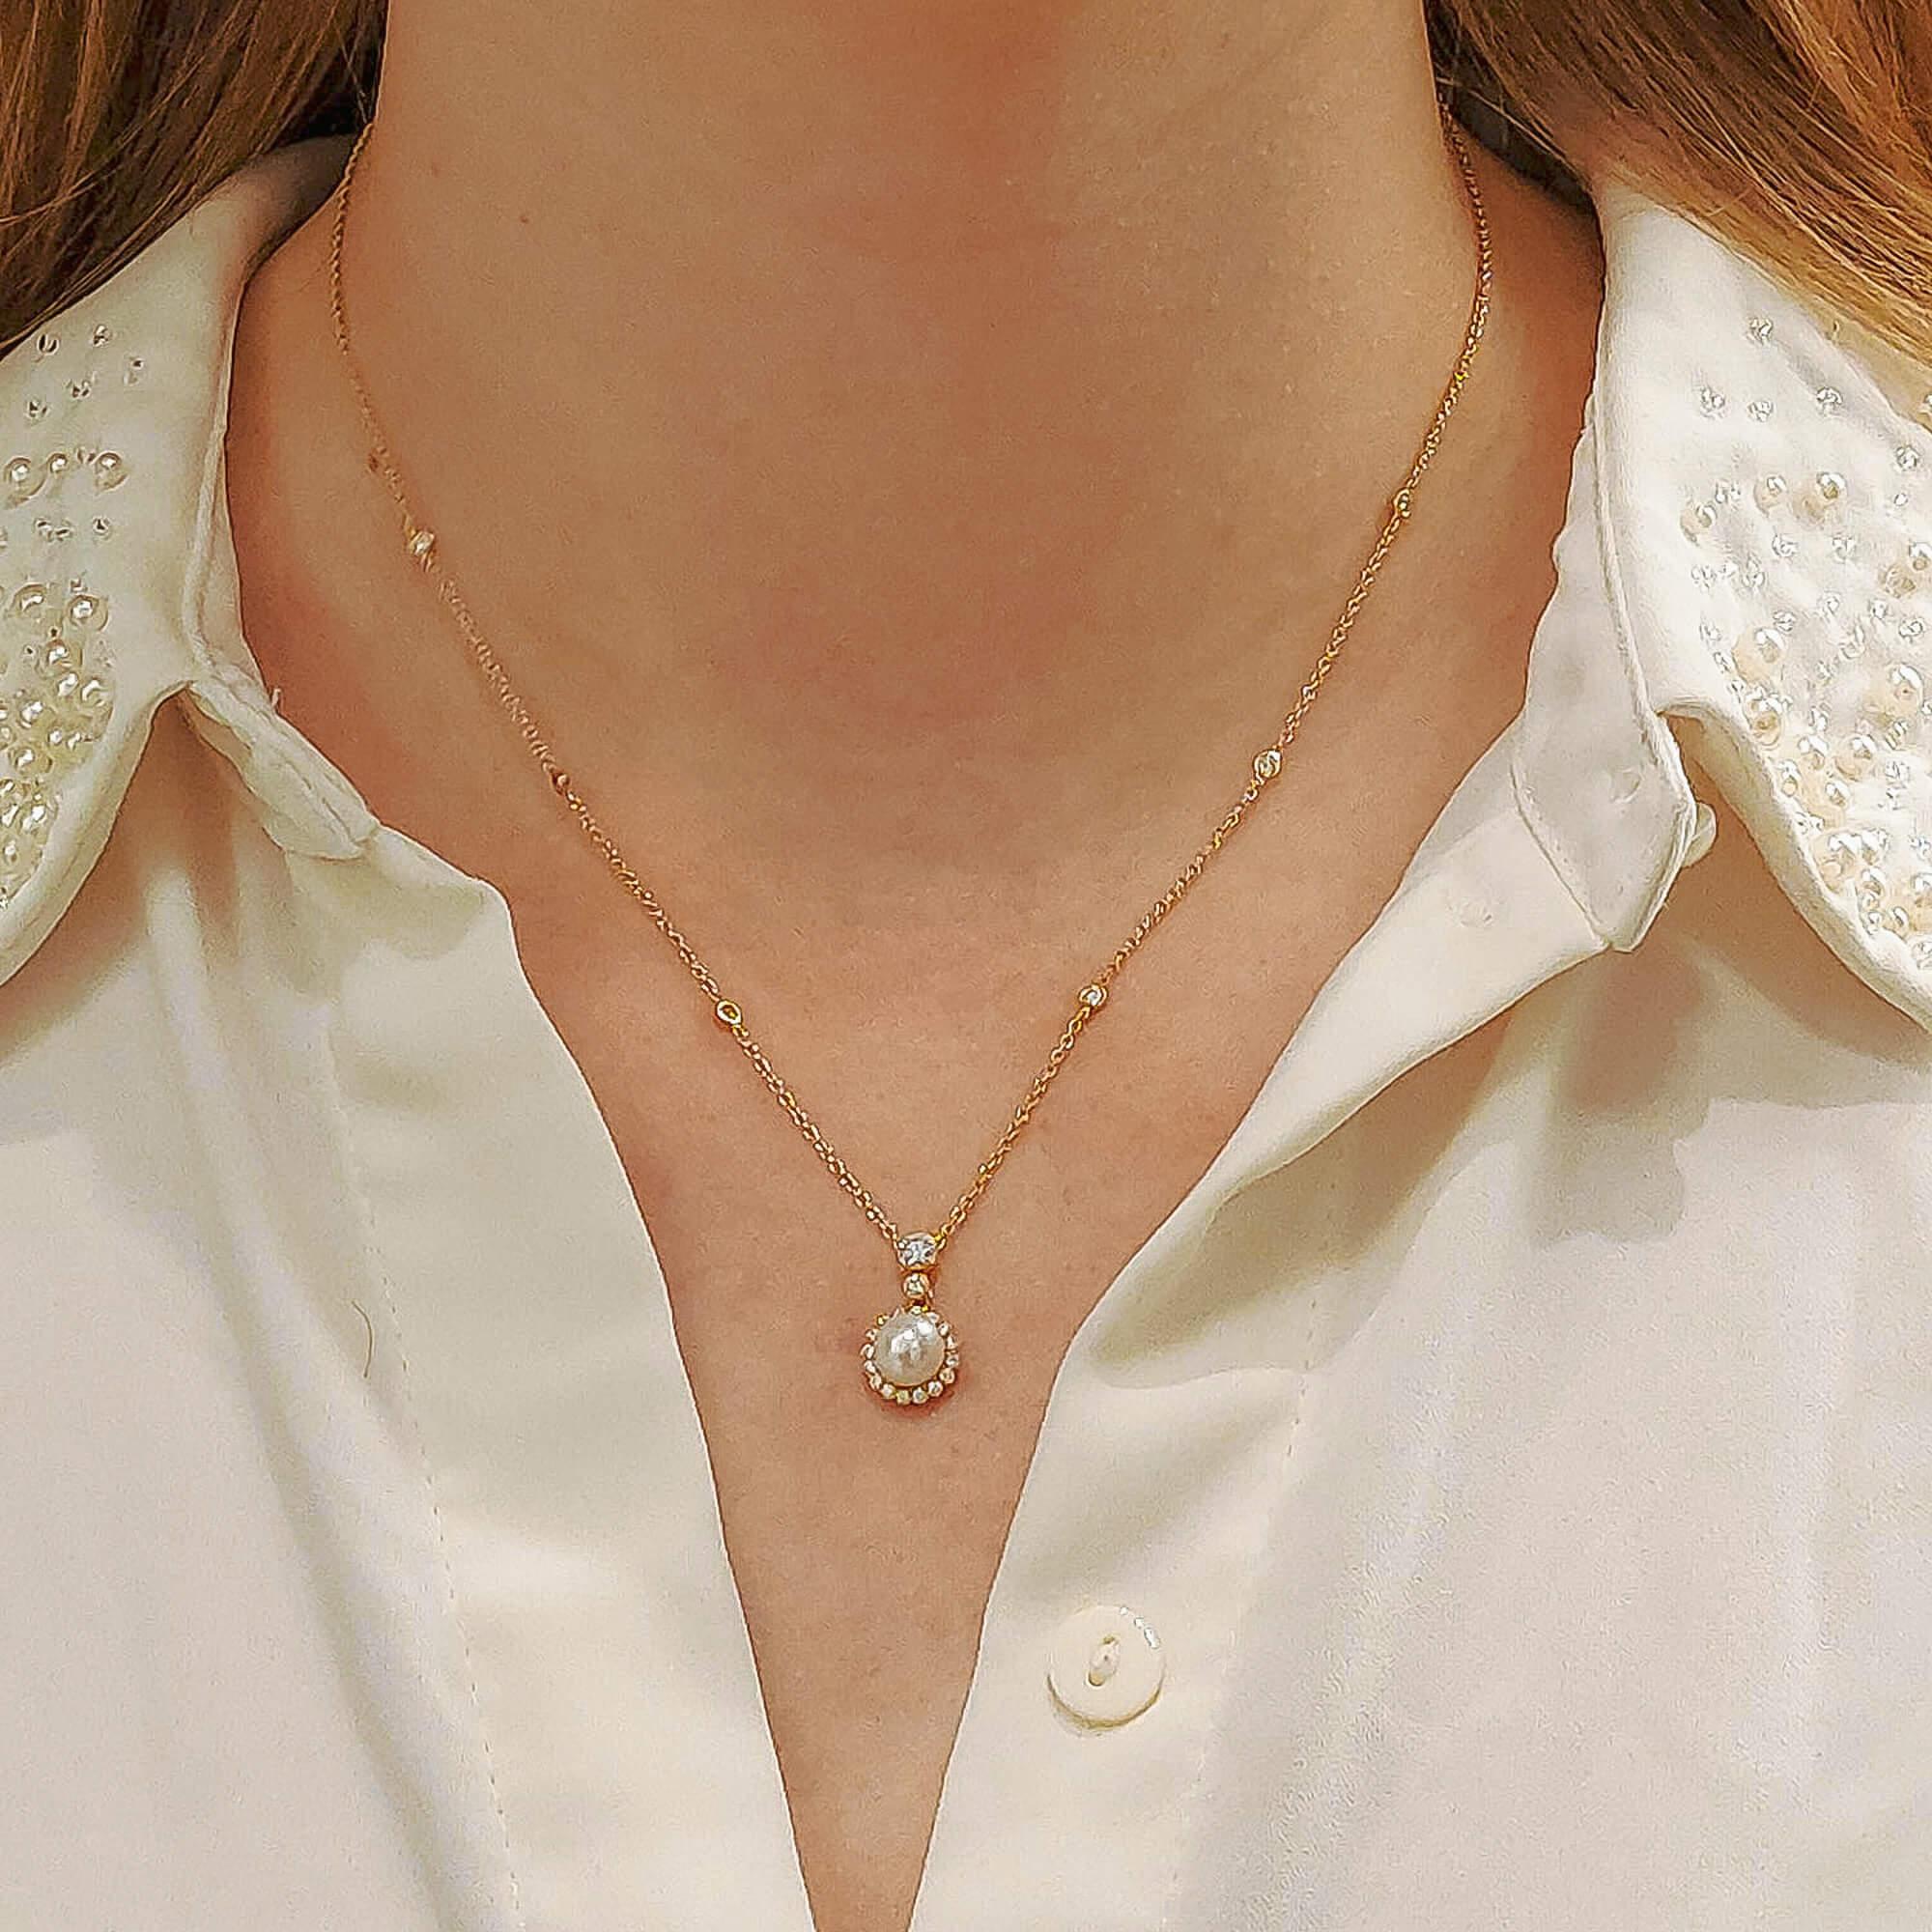 A stunning pearl and diamond pendant set in 18k yellow gold. The pearl is of superior lustre and centrally set in a halo of 16 diamonds. The diamonds are in a scalloped surround and suspended from a further 2 articulated rub over set round brilliant